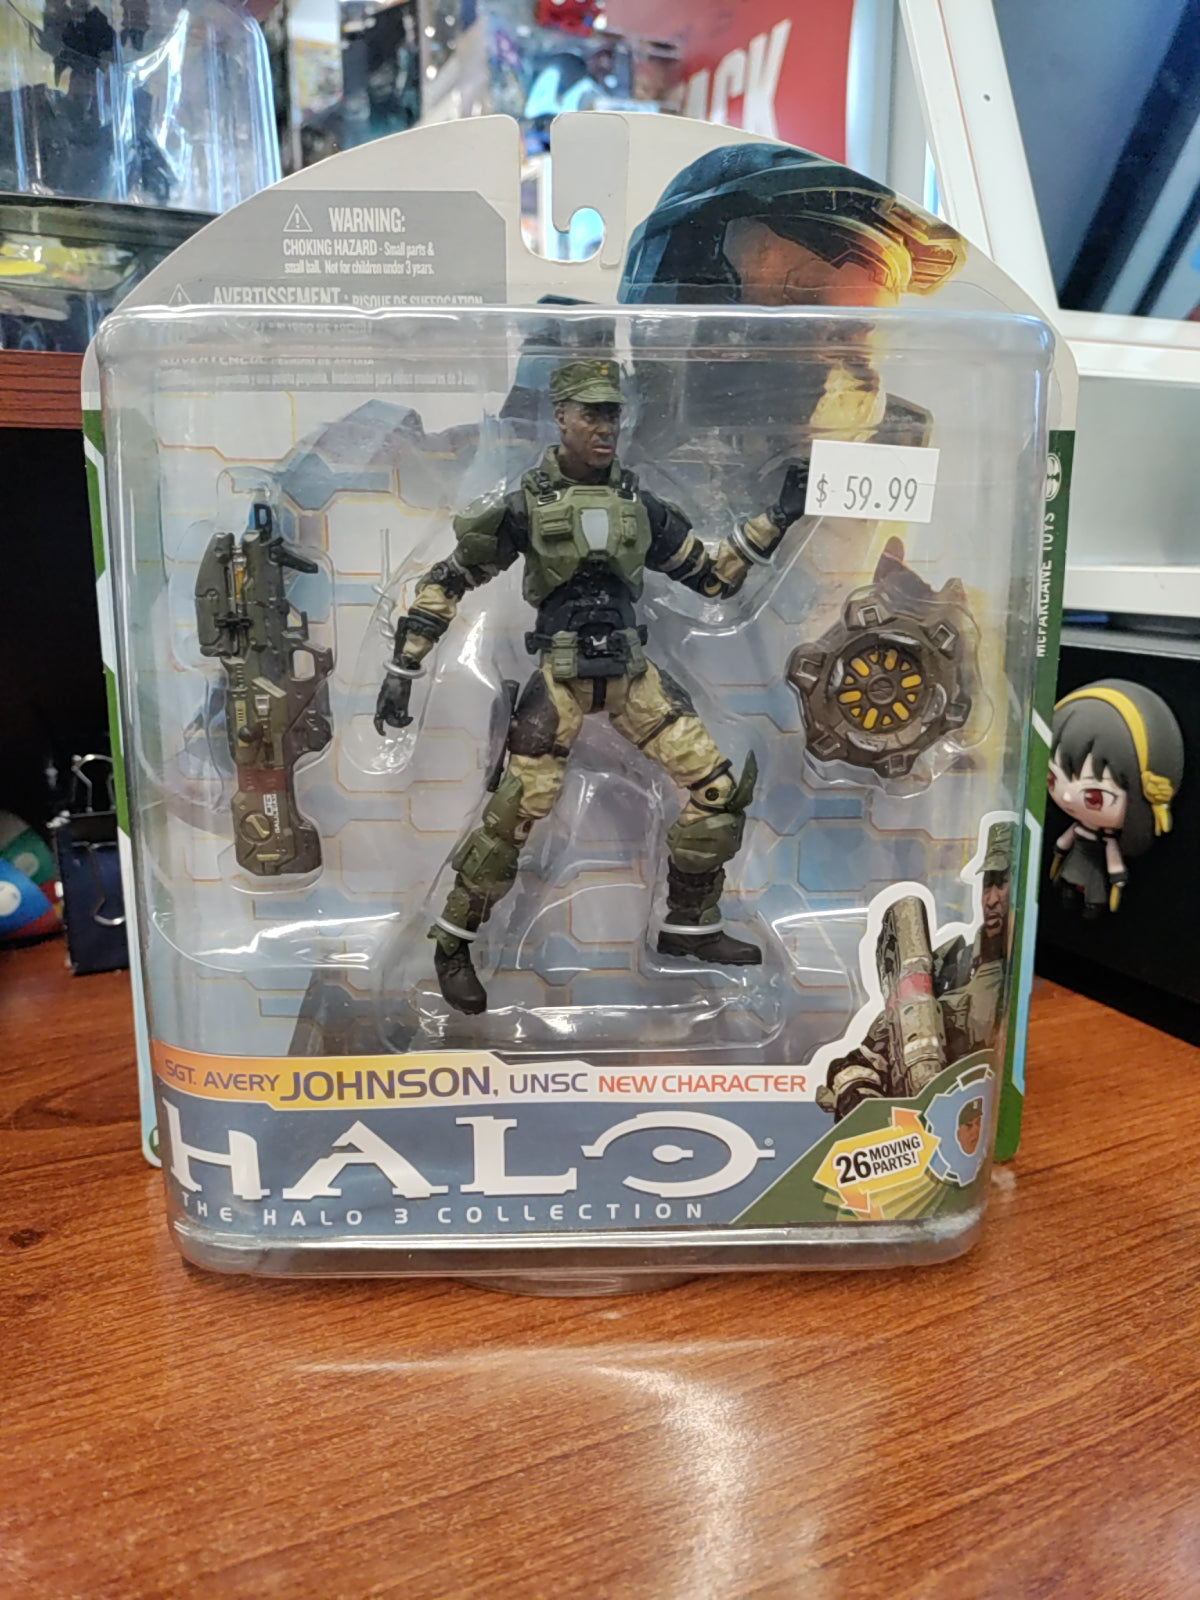 McFarlane Toys The Halo 3 Collection Sgt. Avery Johnson UNSC New Character